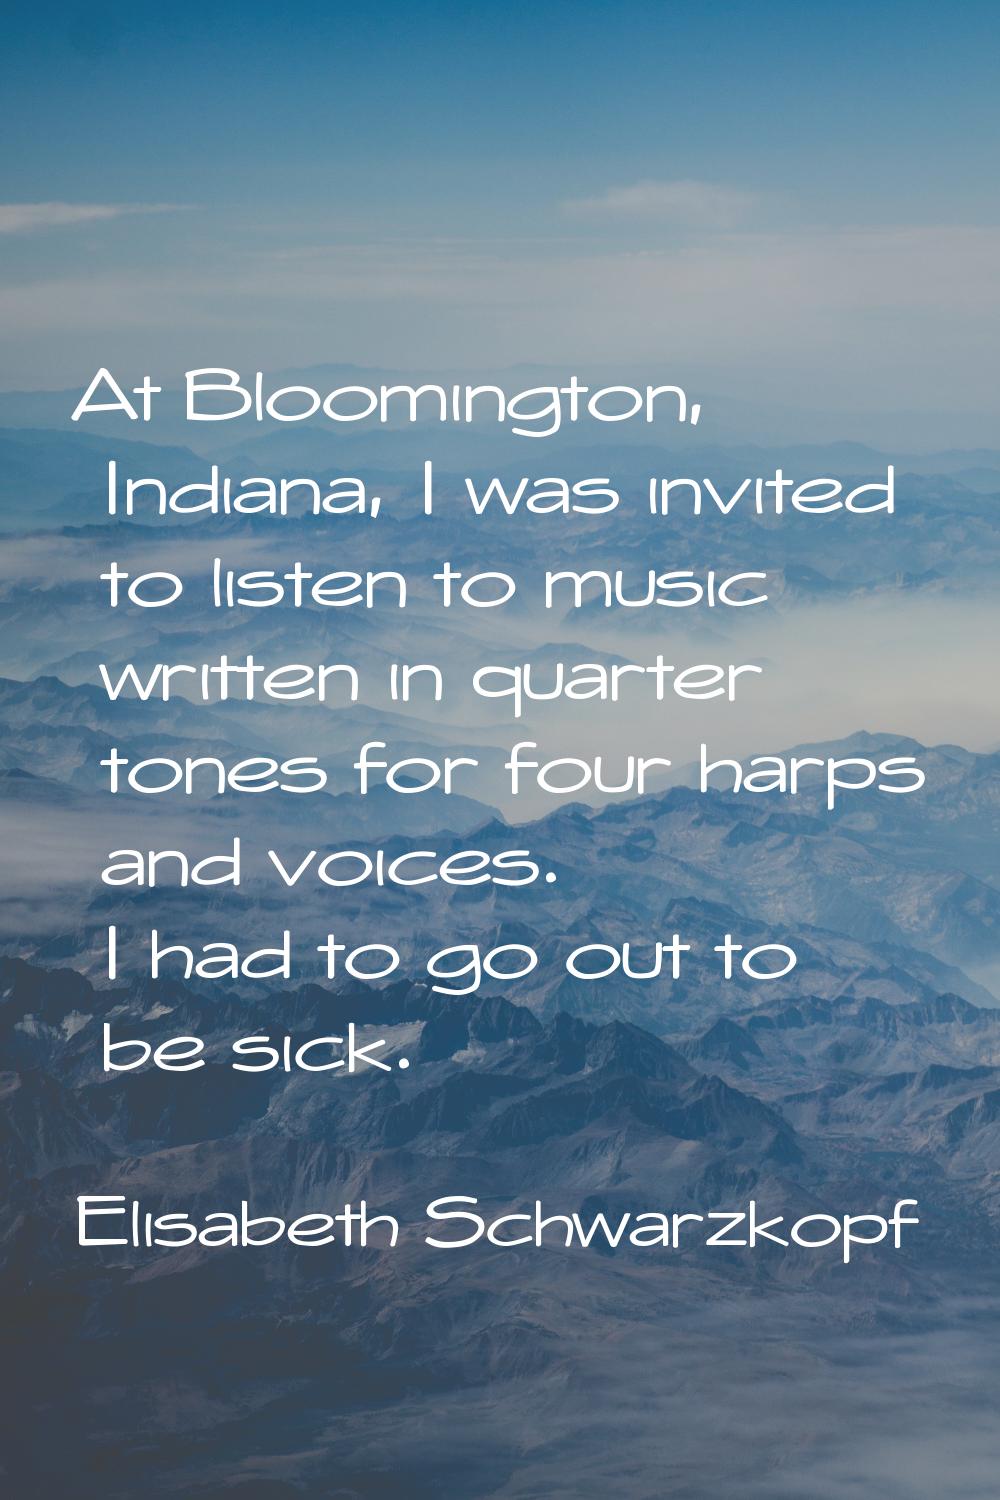 At Bloomington, Indiana, I was invited to listen to music written in quarter tones for four harps a